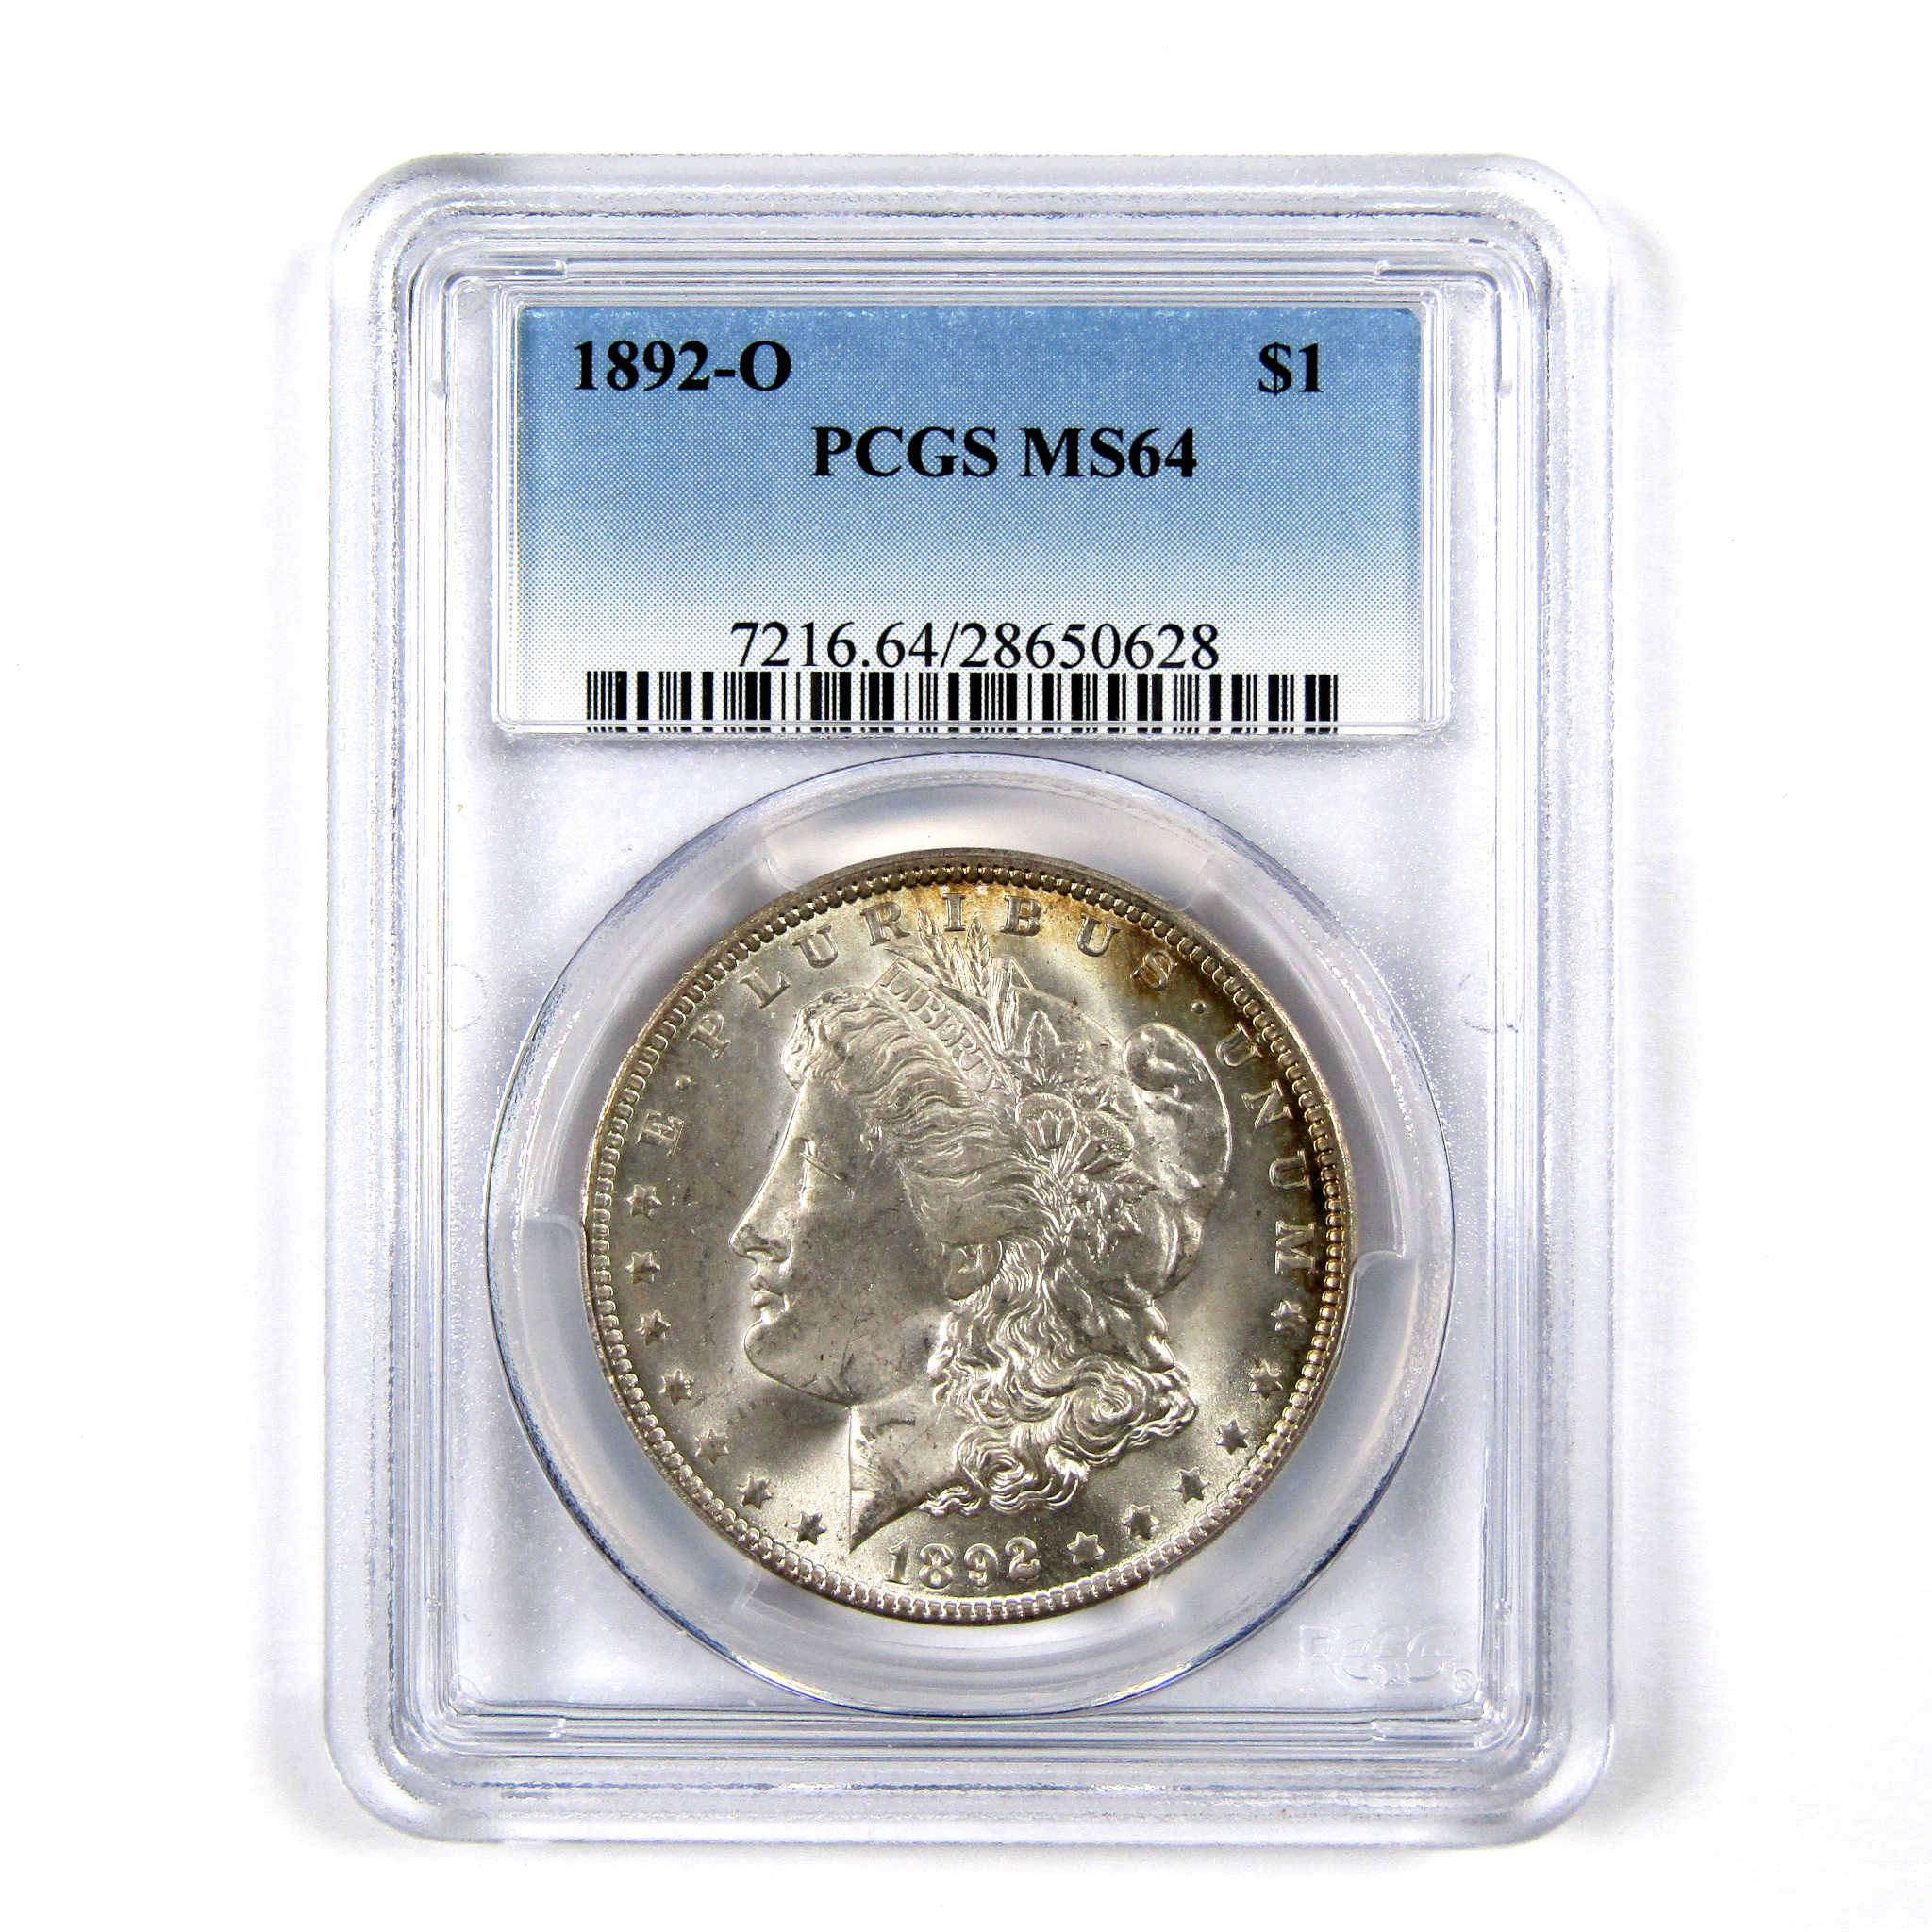 1892 O Morgan Dollar MS 64 PCGS 90% Silver $1 Uncirculated SKU:I9180 - Morgan coin - Morgan silver dollar - Morgan silver dollar for sale - Profile Coins &amp; Collectibles